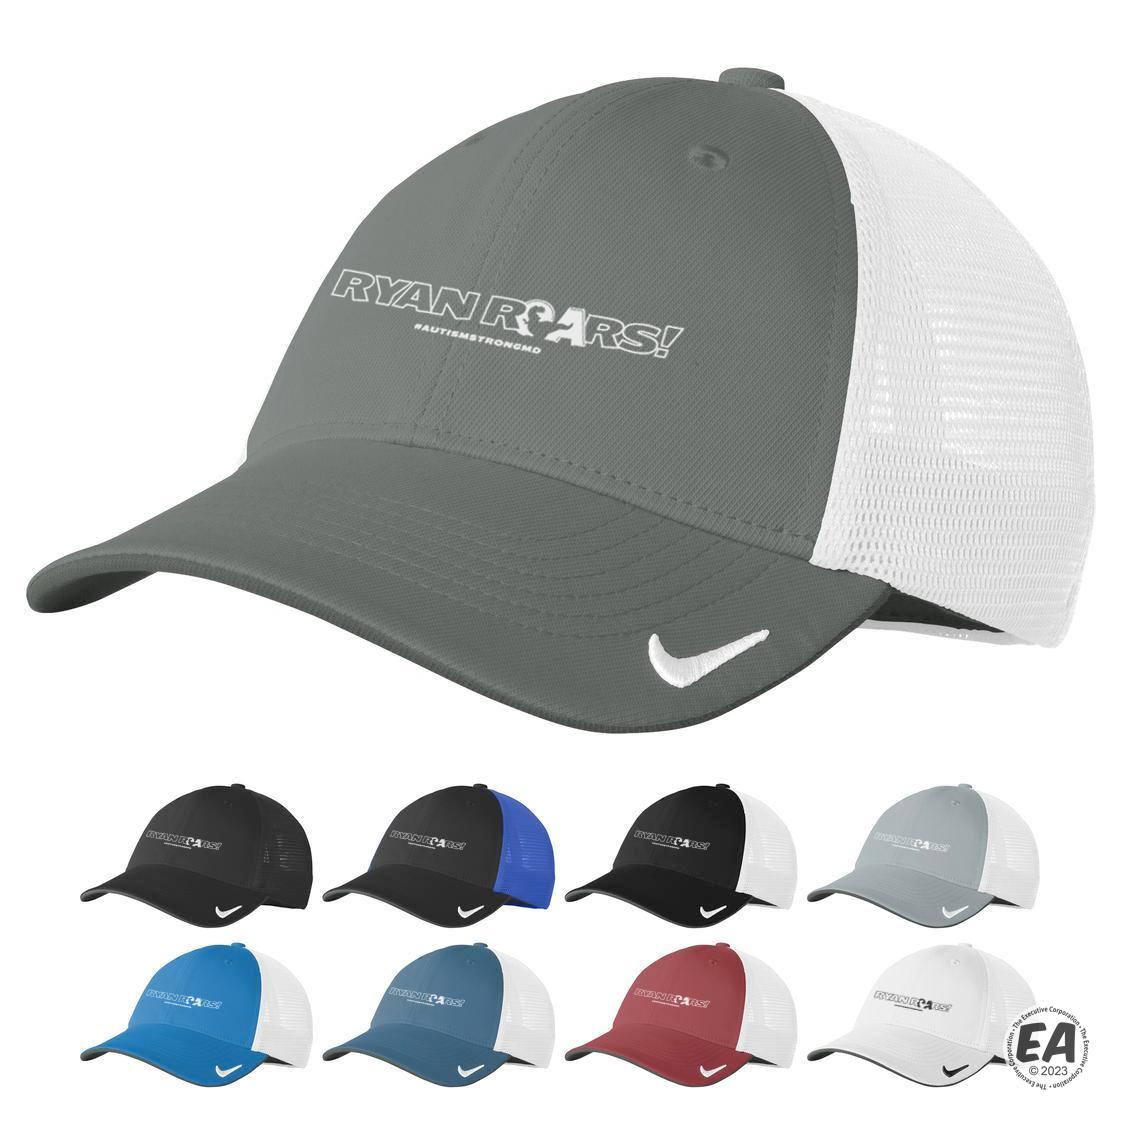 Nike Dri-FIT Mesh Back Cap. NKAO9293 — Tag your Swag